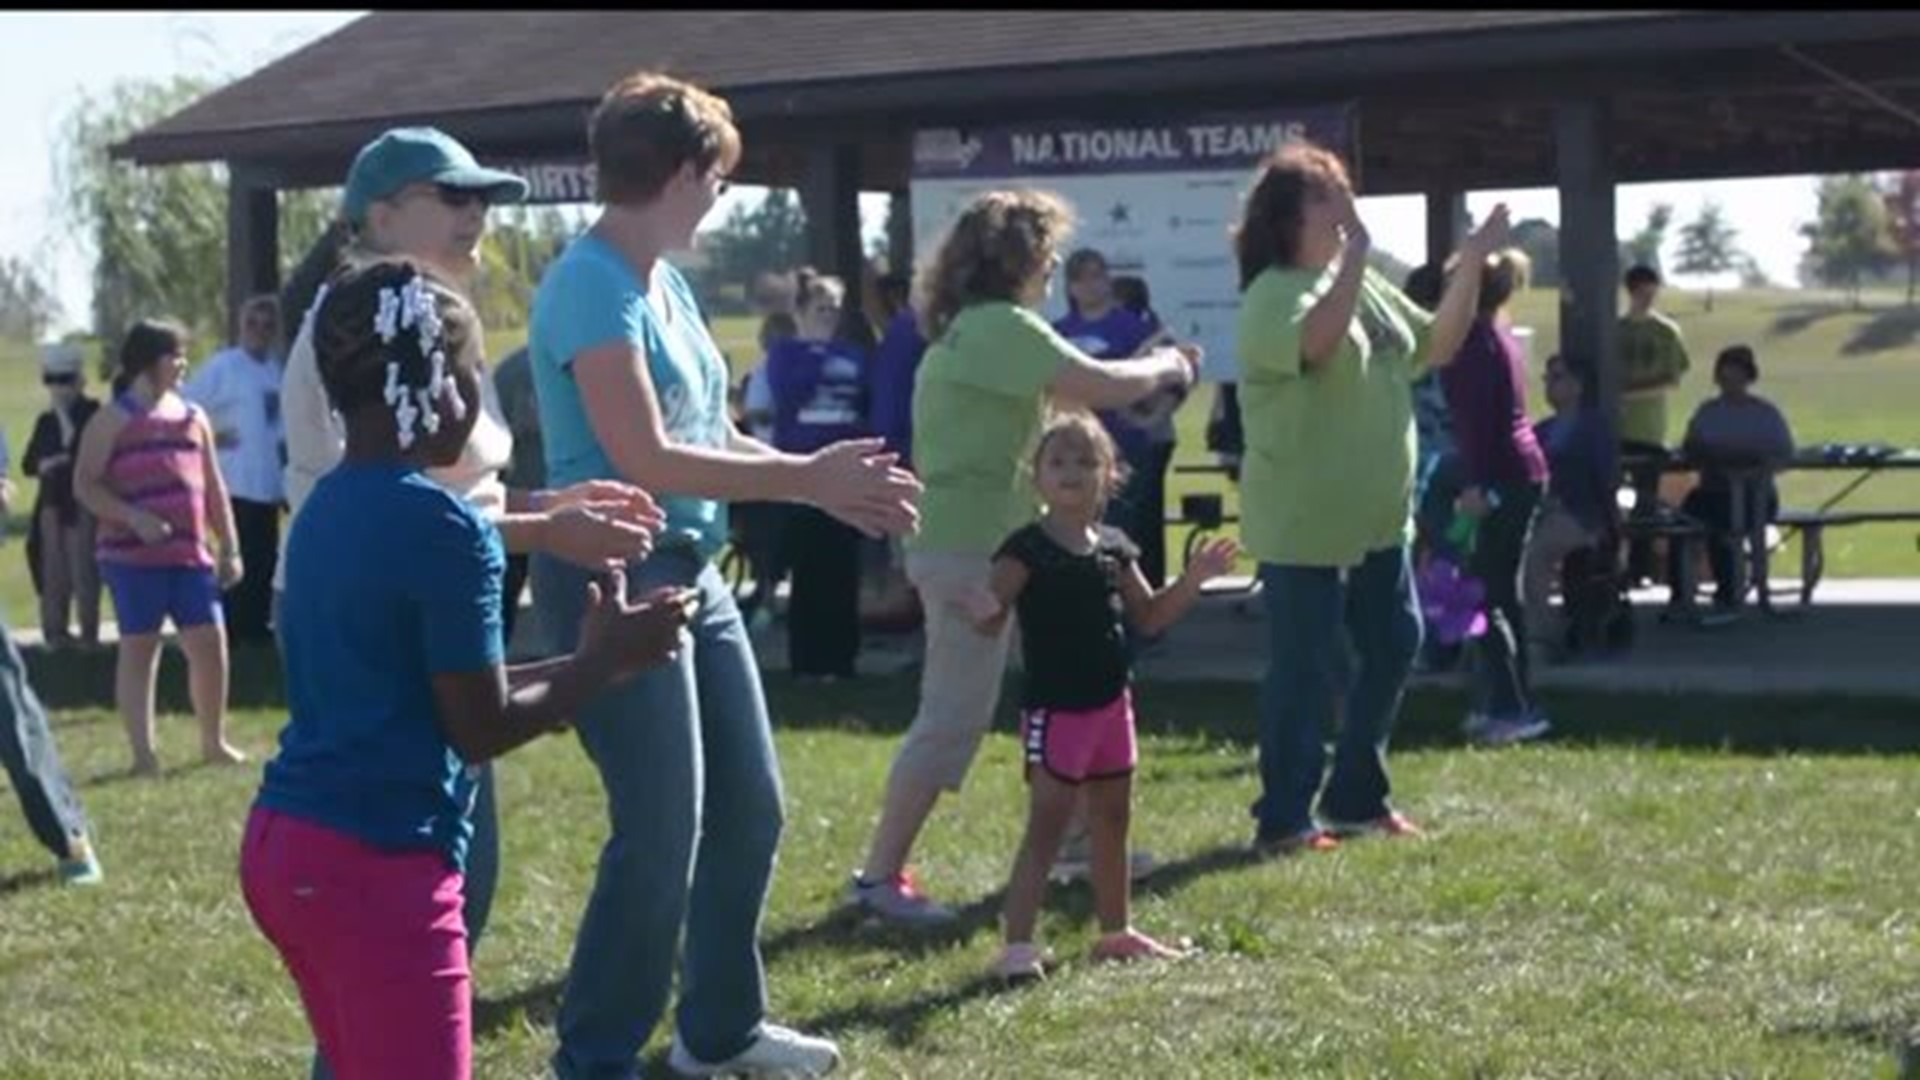 2014 Walk to End Alzheimers in York